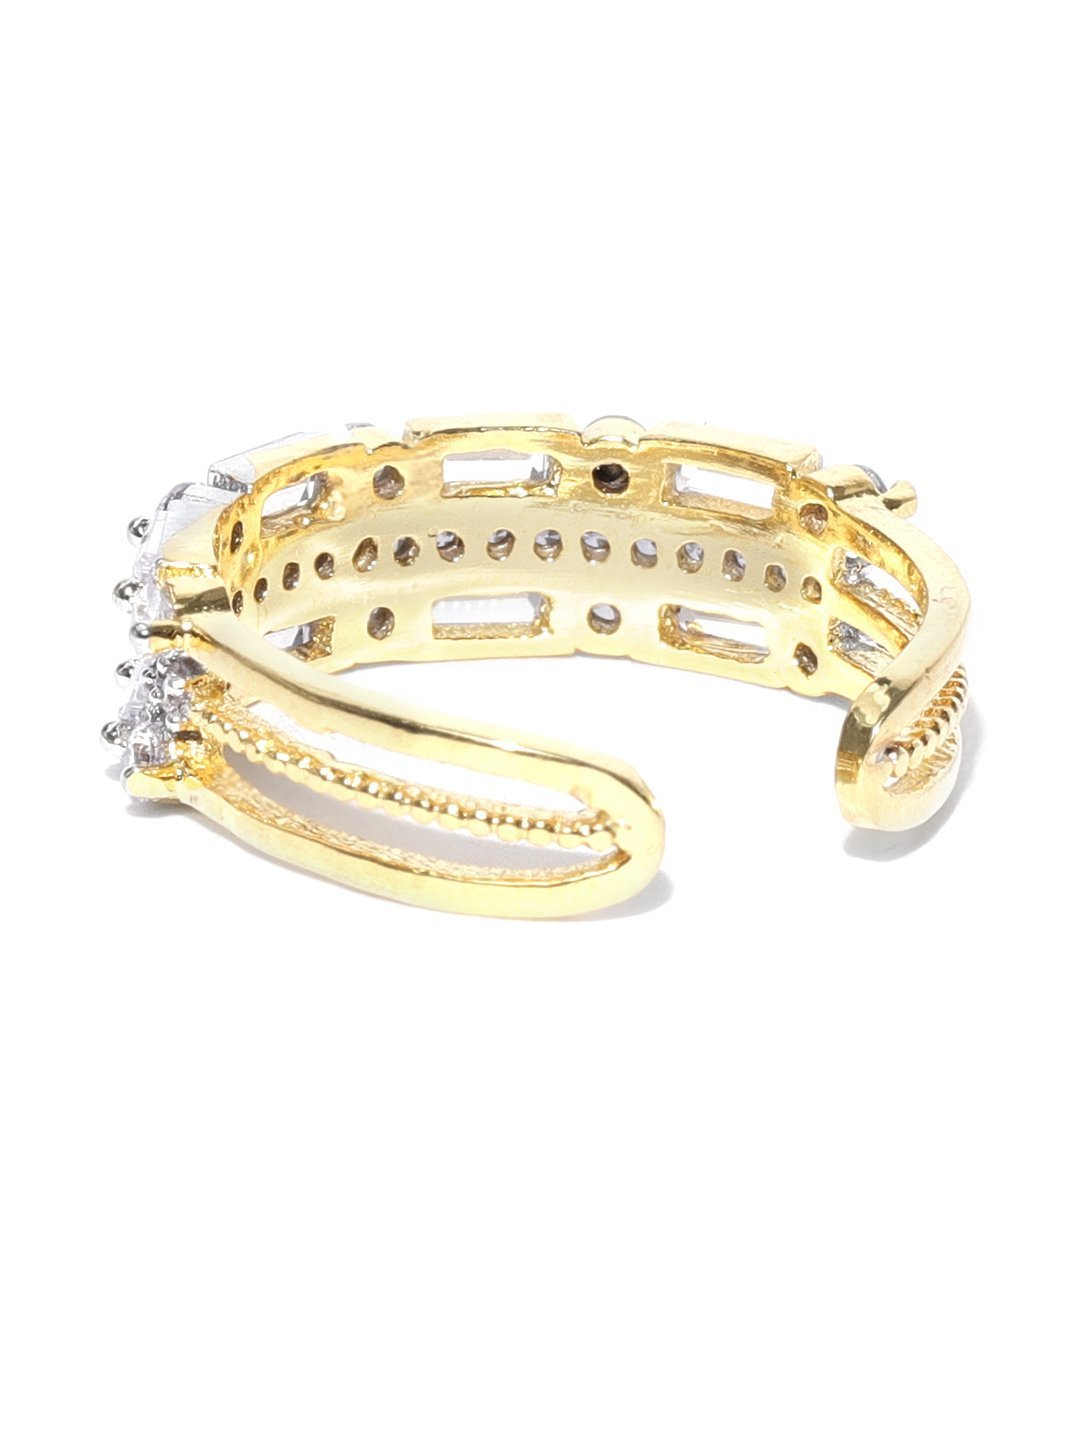 Women's Gold-Plated American Diamond Studded Bracelet With Finger Ring - Priyaasi